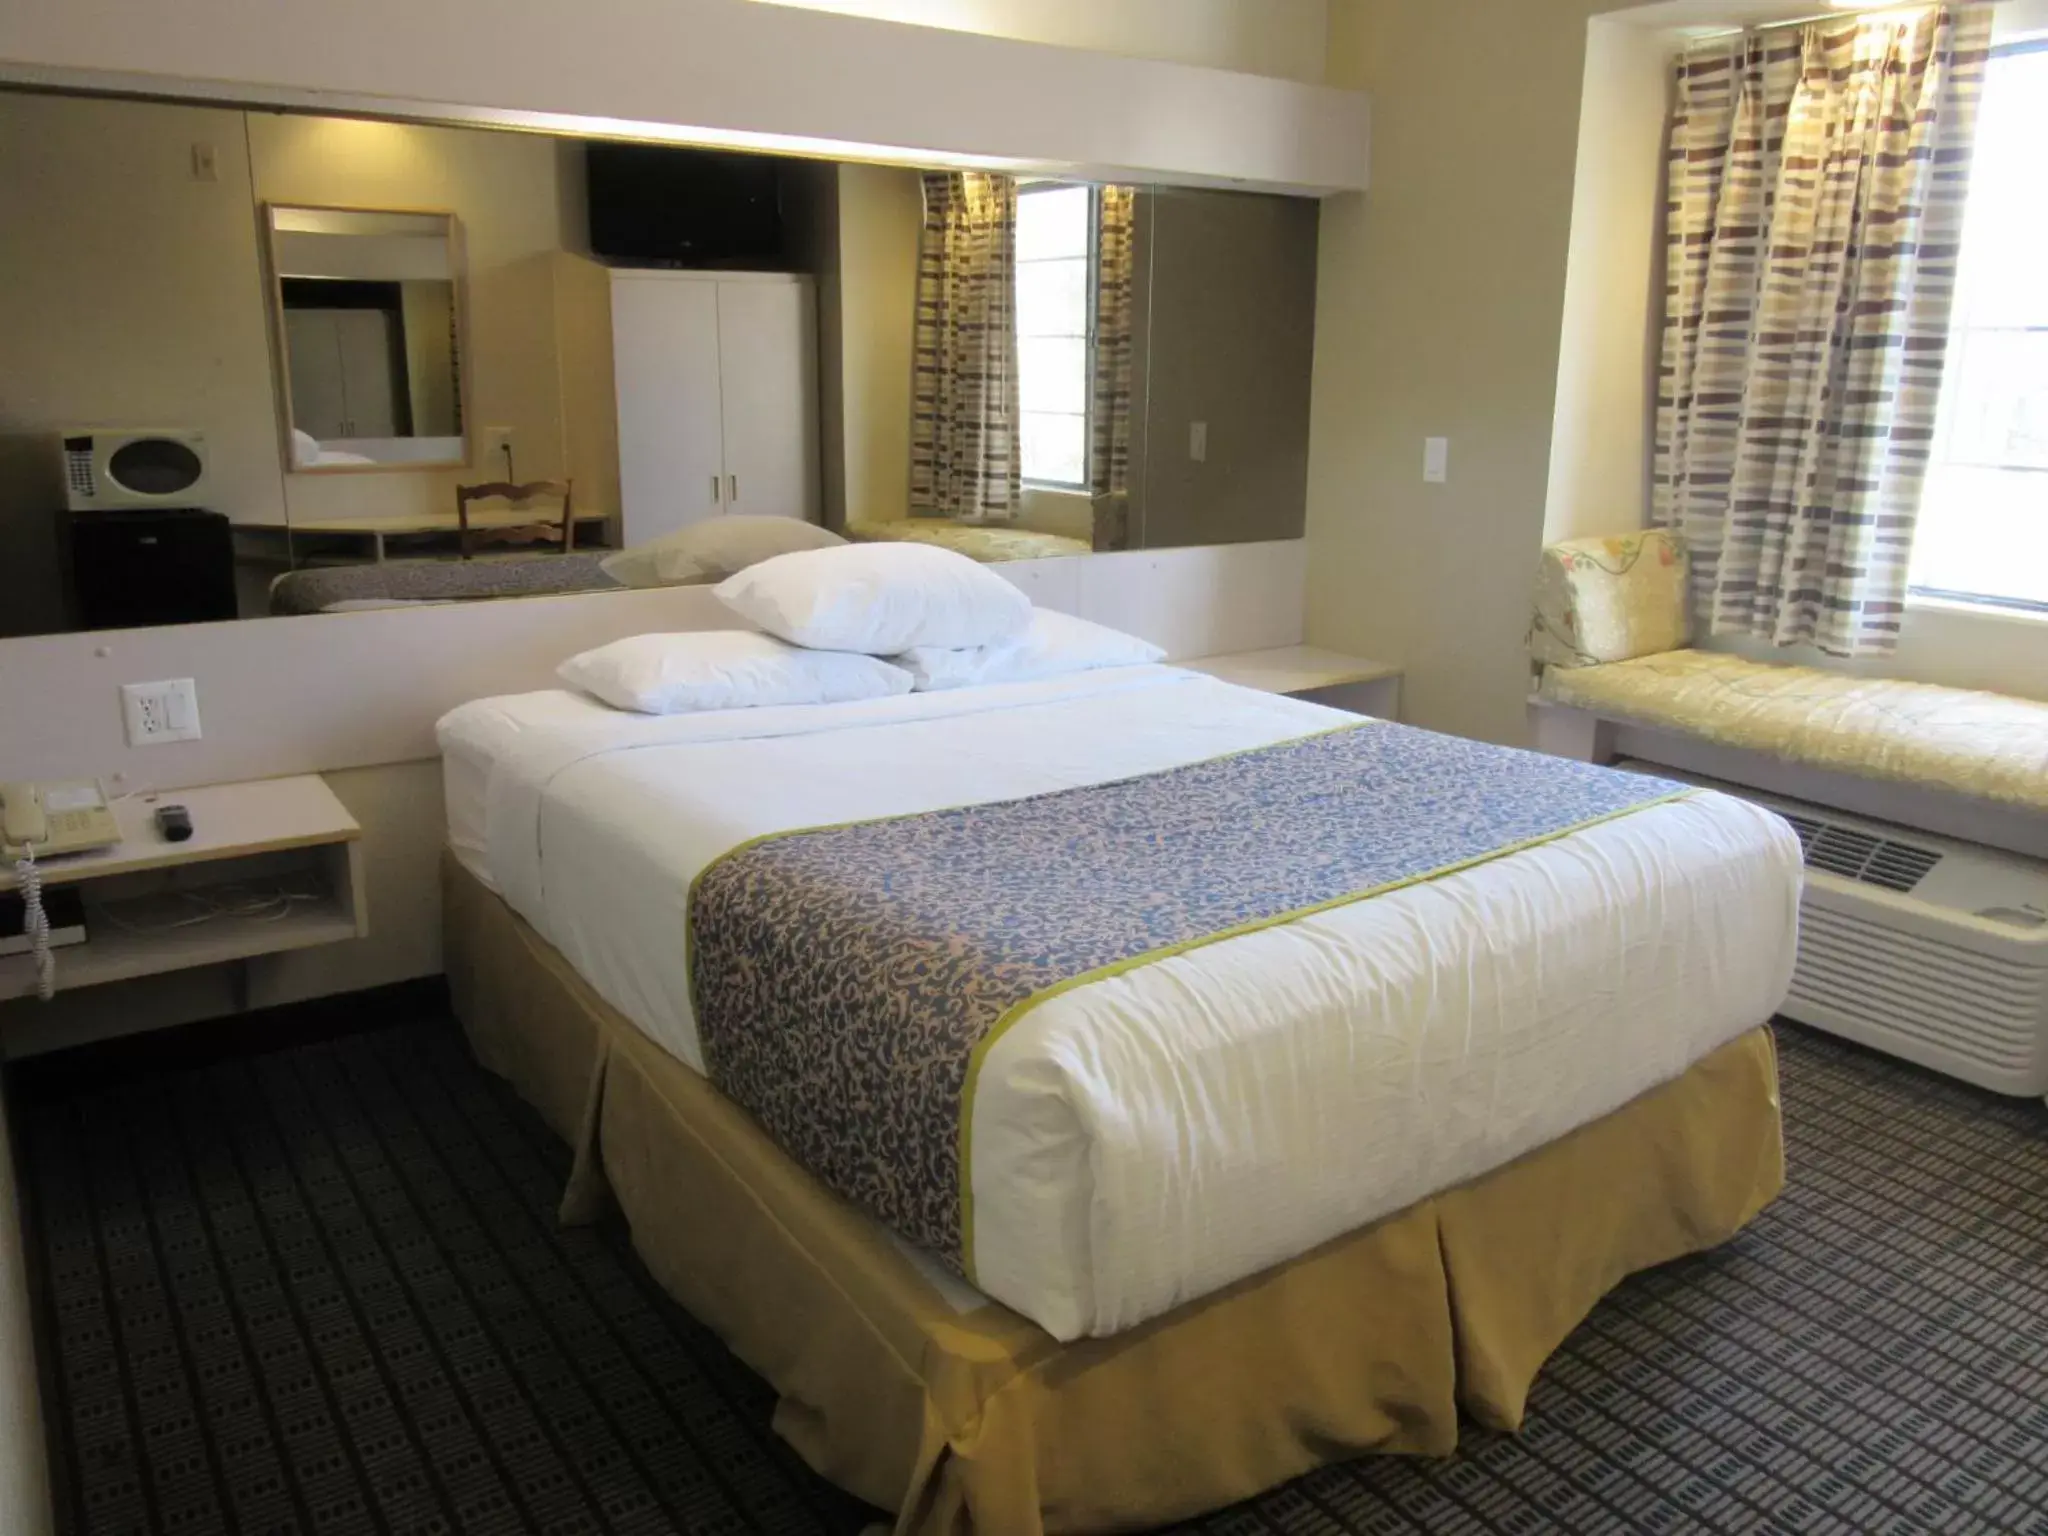 Bed, Room Photo in Microtel Inn & Suites by Wyndham Arlington/Dallas Area